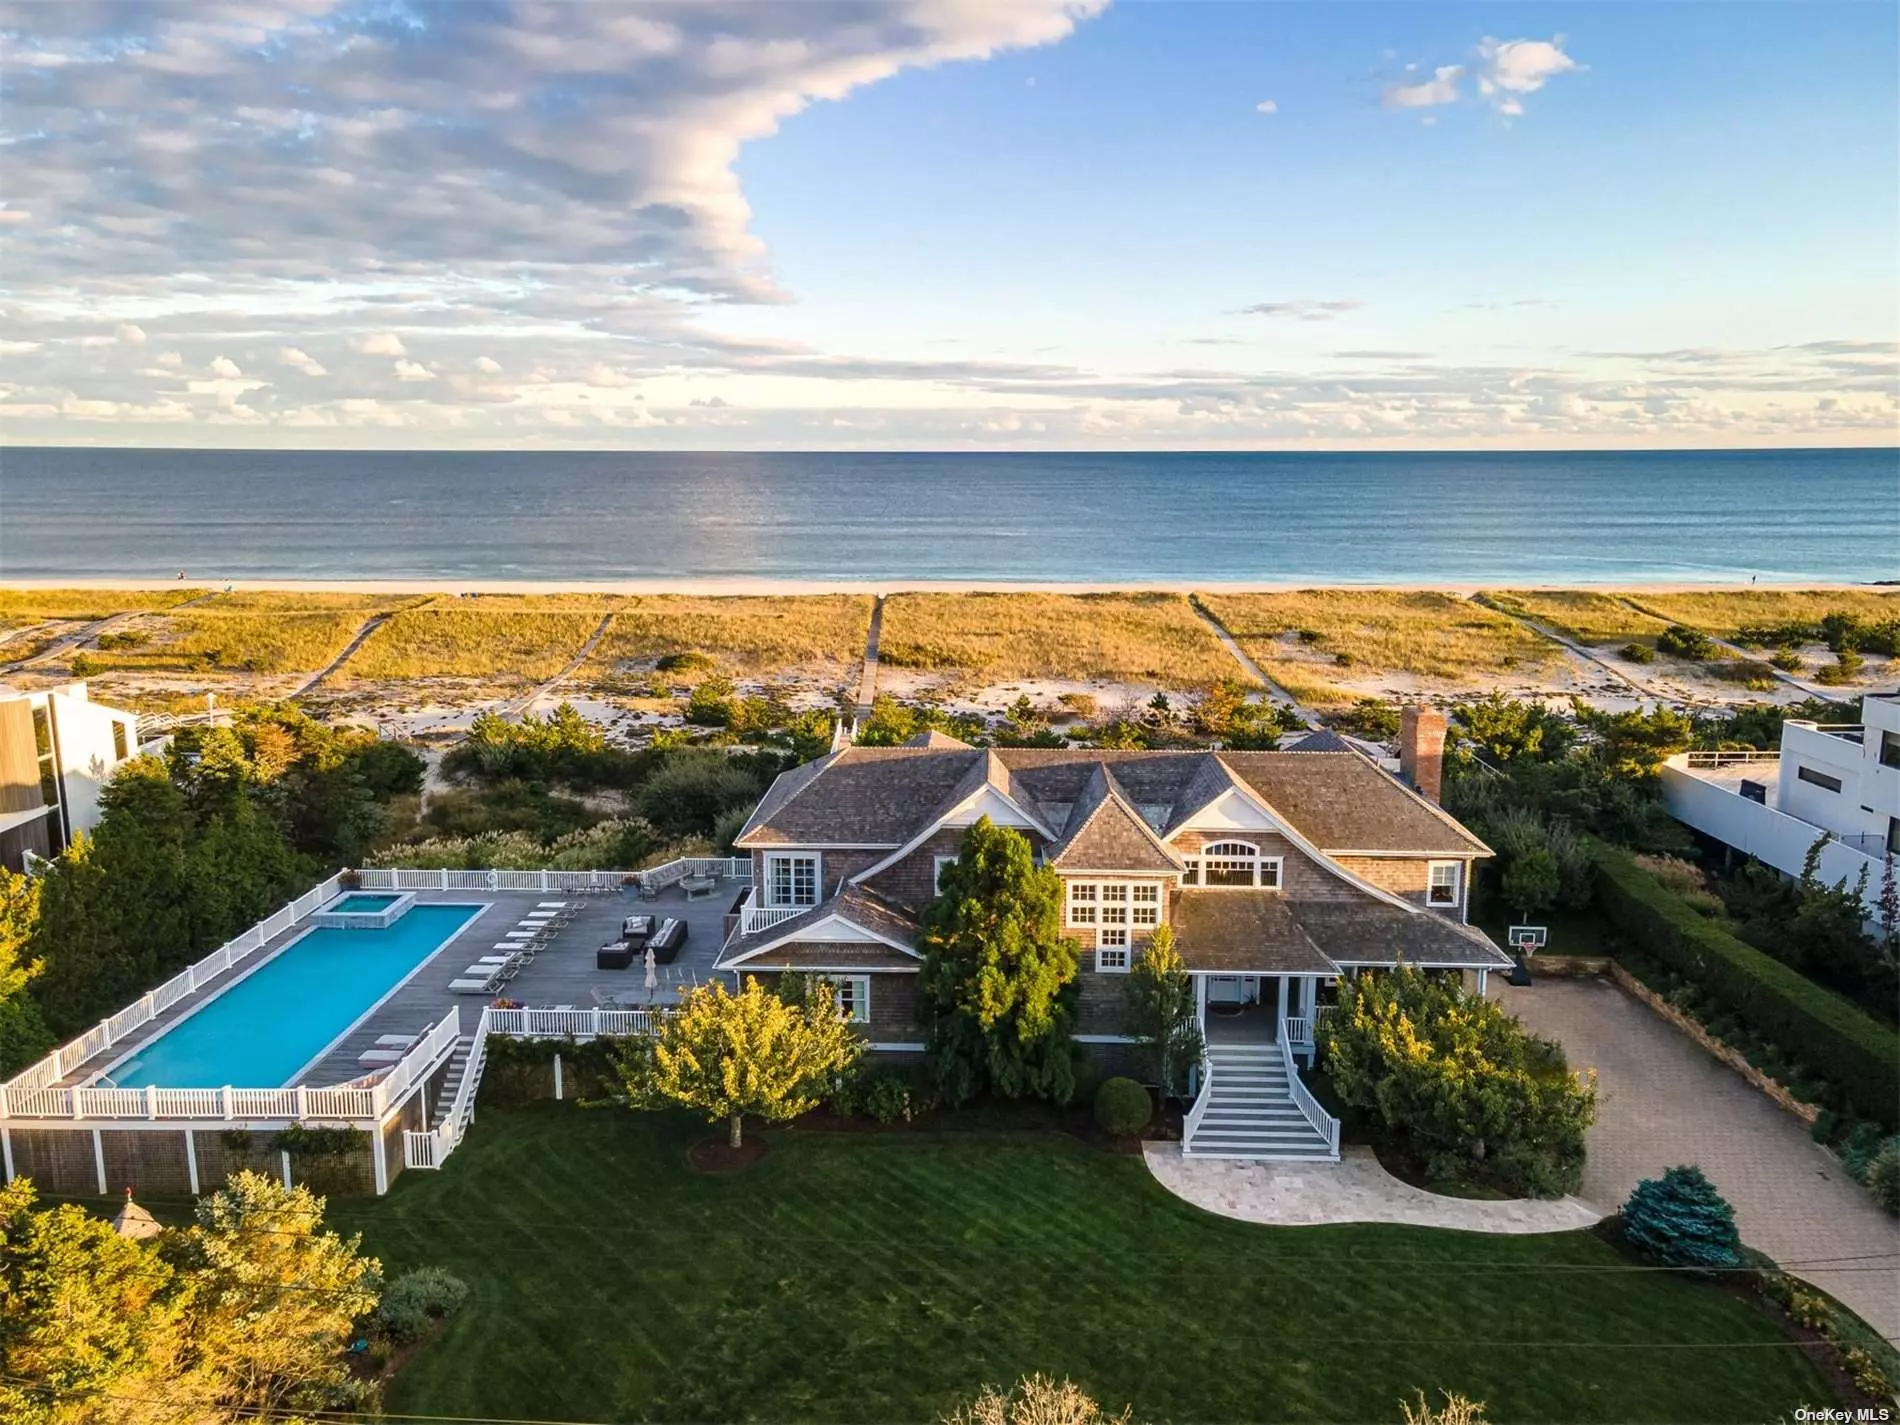 Located within Dune Road&rsquo;s coveted &rsquo;Between the Bridges&rsquo;, 175 Dune Road offers 225&rsquo; of sprawling ocean frontage. The 1.94 acre property sits among rare double dune & jetty protection, and features a 20&rsquo;x60&rsquo; gunite pool & spa, upper & lower oceanfront decks & ample lawn. The first level offers a grand foyer & living room leading to lower decking, luxurious ensuite master, 5 additional bedrooms & 4 full baths. The upper level features a light filled great room, dining room & vast, fully equipped gourmet kitchen, all with unrivaled views of the Atlantic Ocean. The upper level is replete with powder room& 7th bedroom, which is ensuite with private balcony overlooking the bay. Outdoor highlights include a double head outdoor shower with changing room, private walkway to the ocean & deeded right of way to the bay. Endless upgrades include a large 2021 renovation, smart home capability & much more! This spectacular property was buiit in 2007 and is not located within a flood zone.